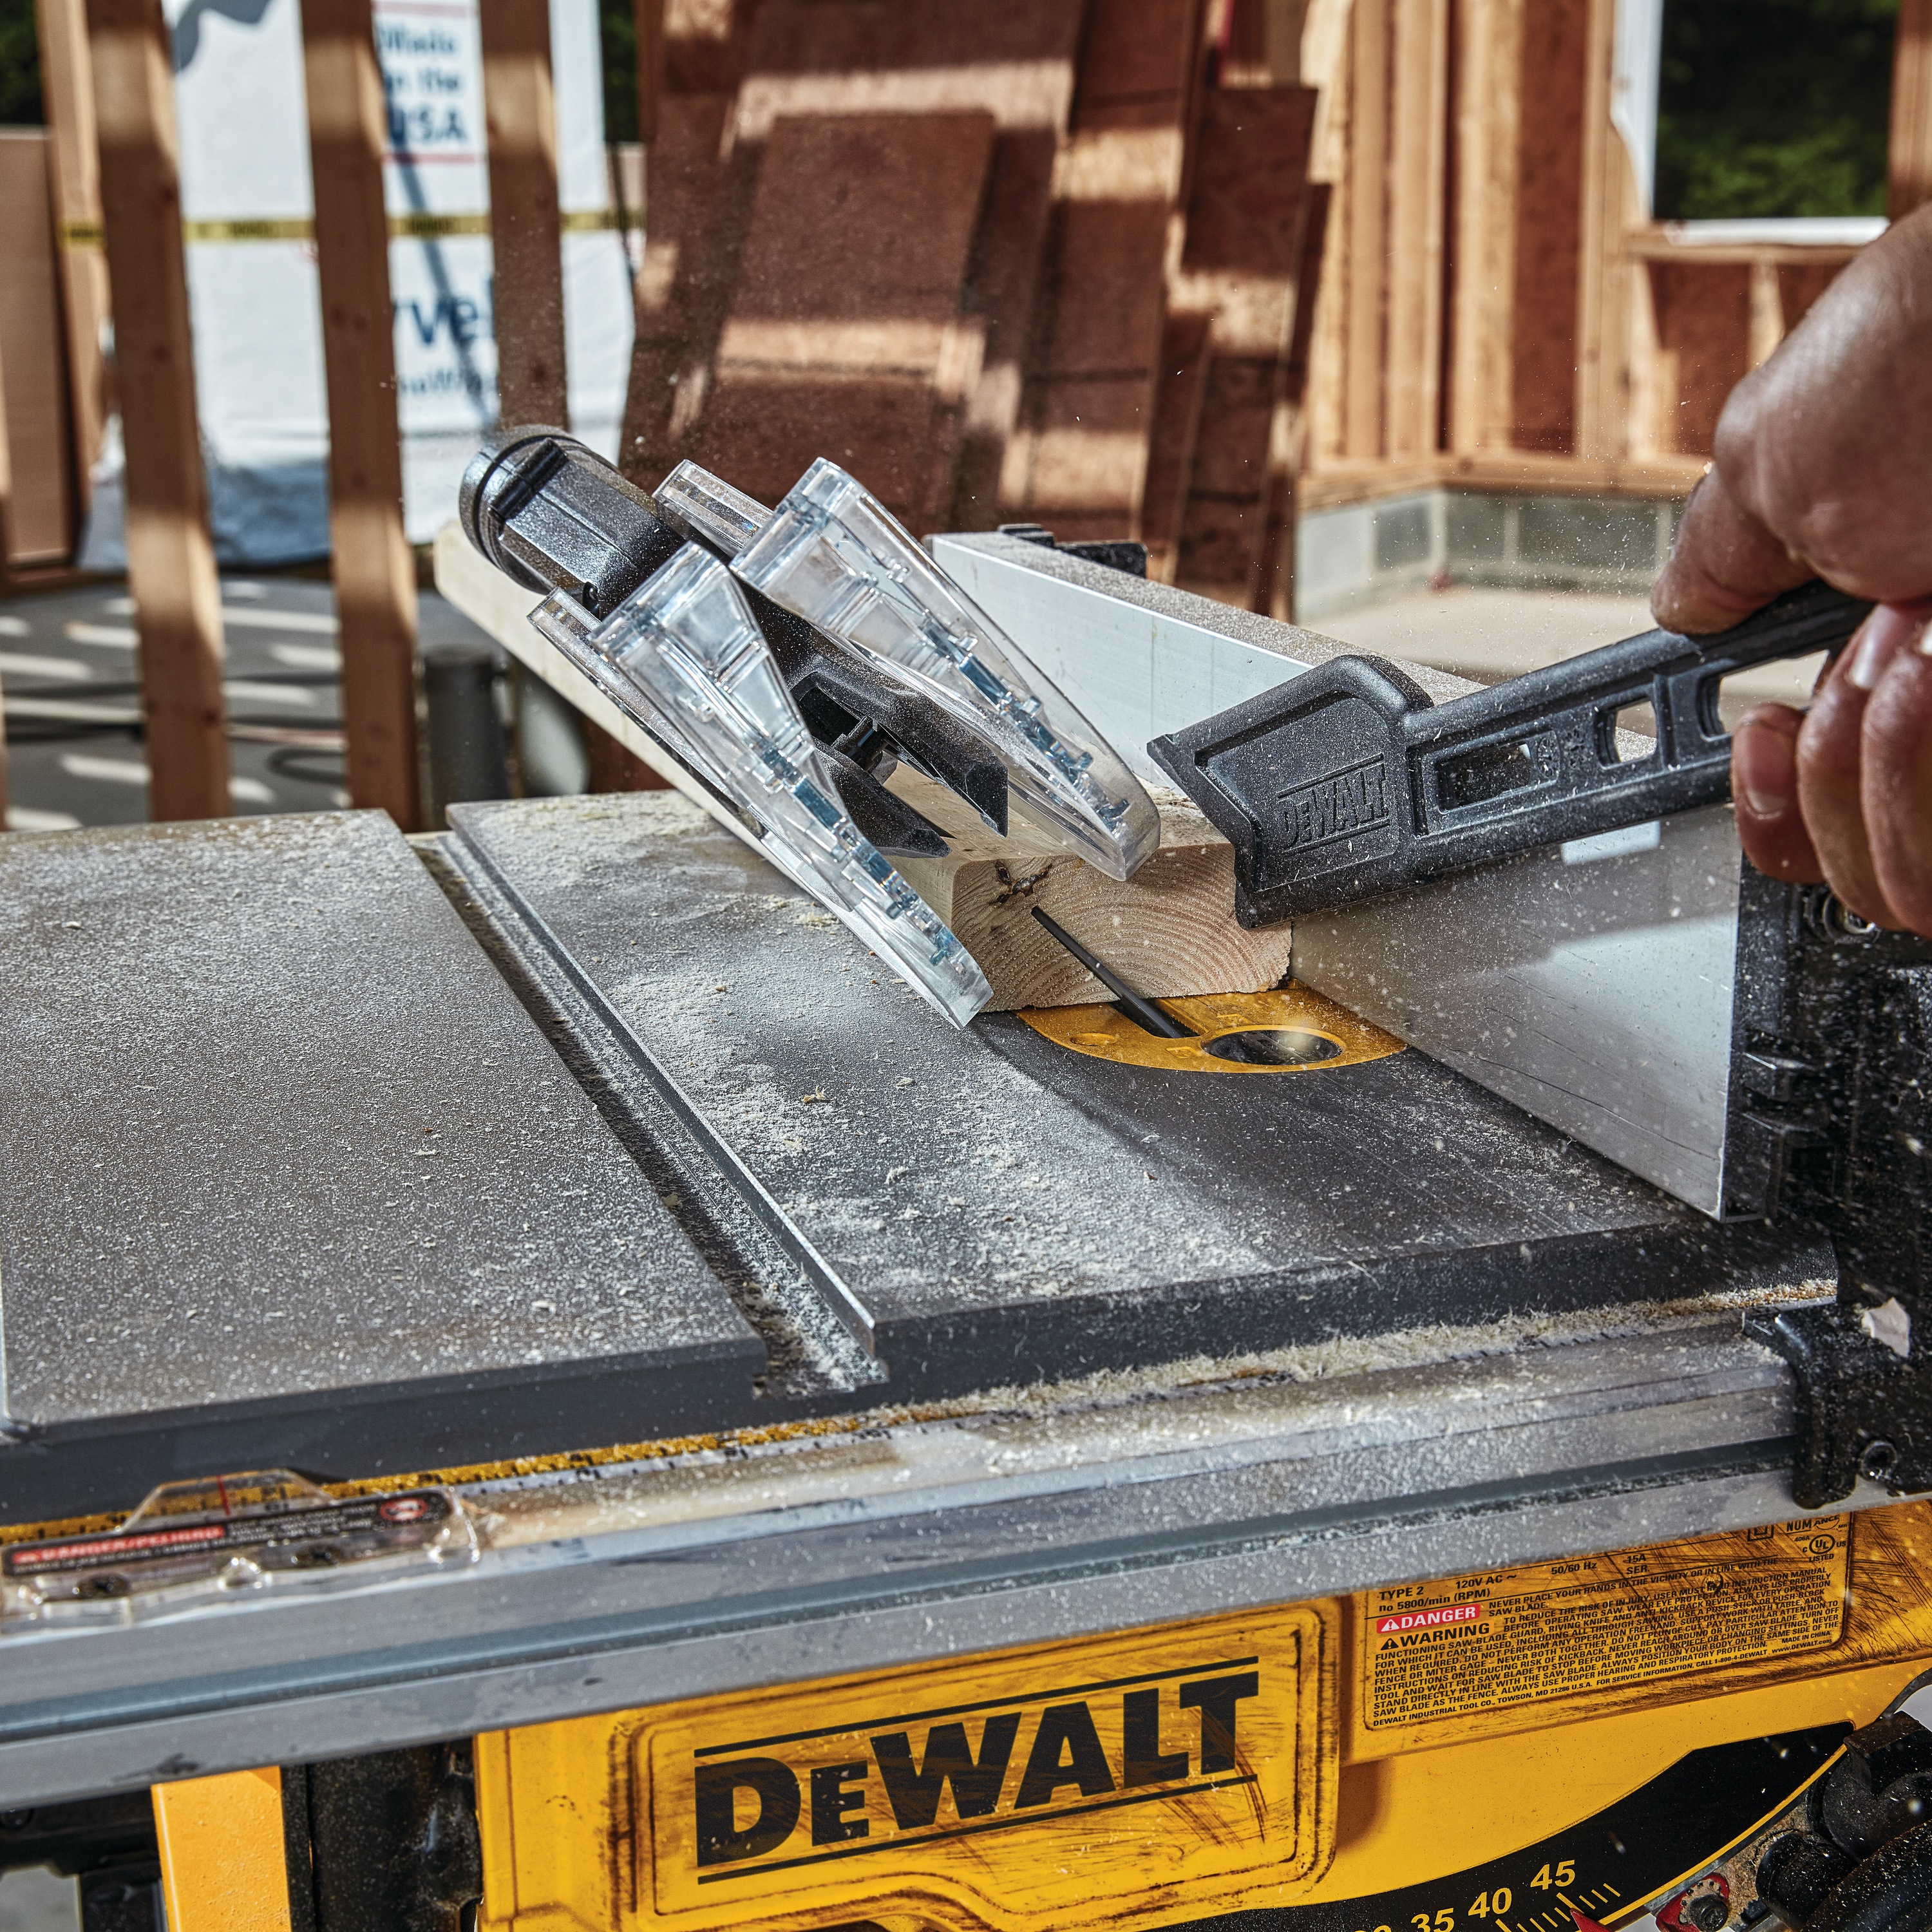 Close up of Compact Jobsite table saw cutting through wooden plank.